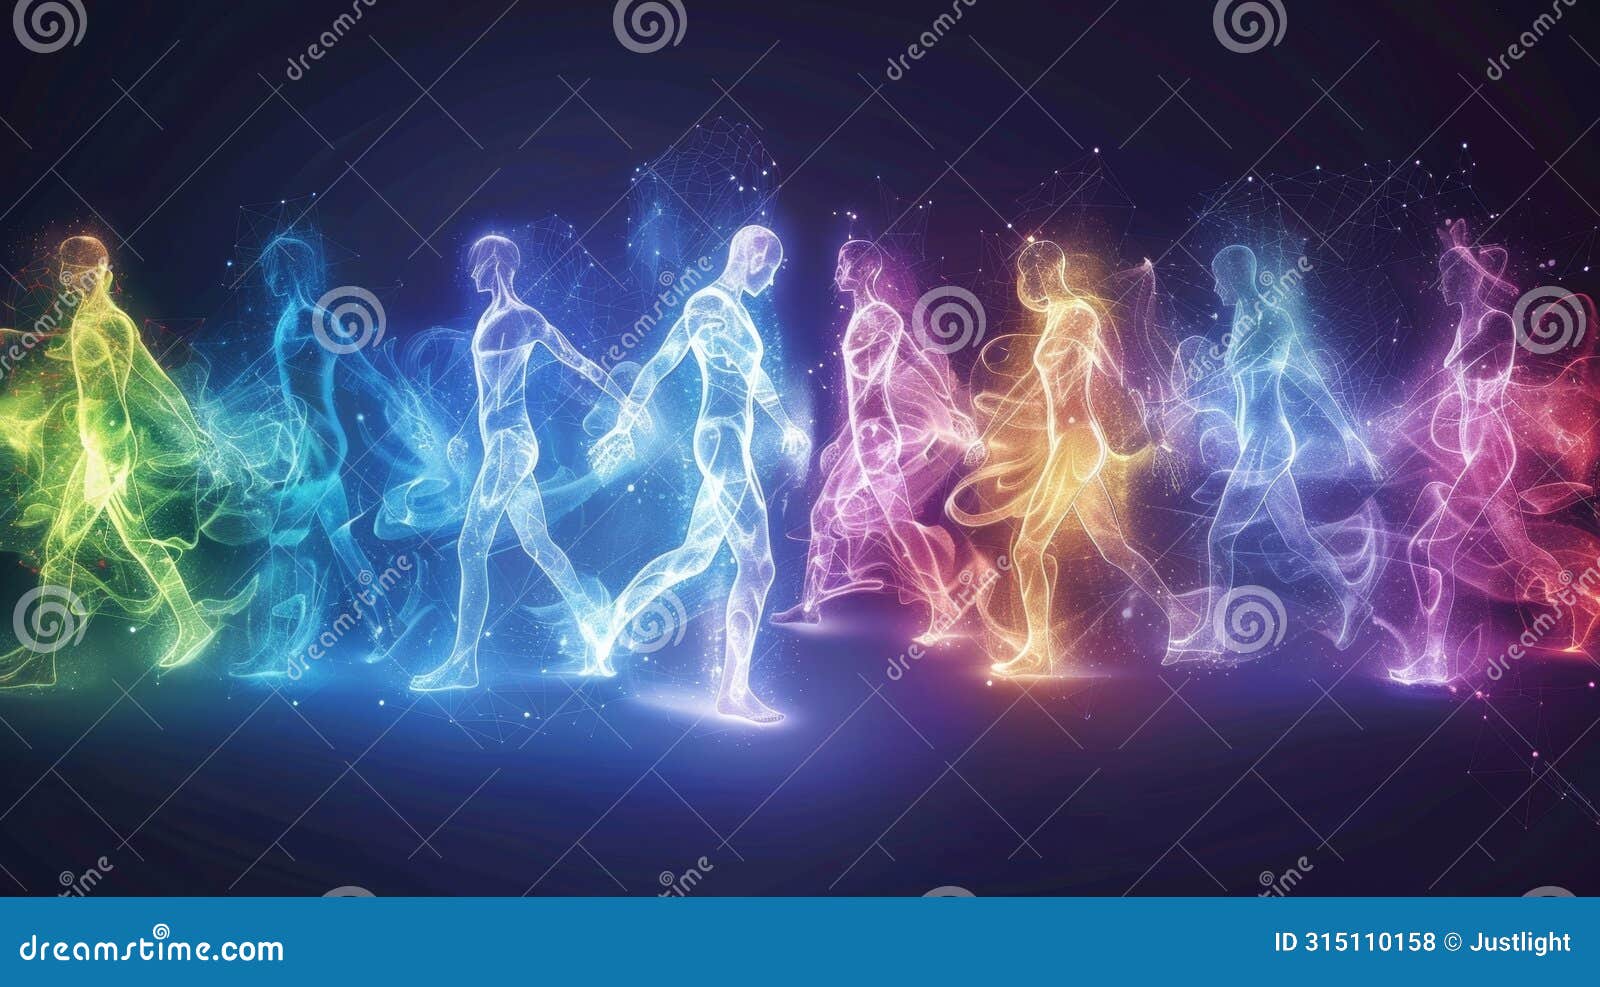 a visualization of the energetic connection between individuals showing how our energy can influence and affect those